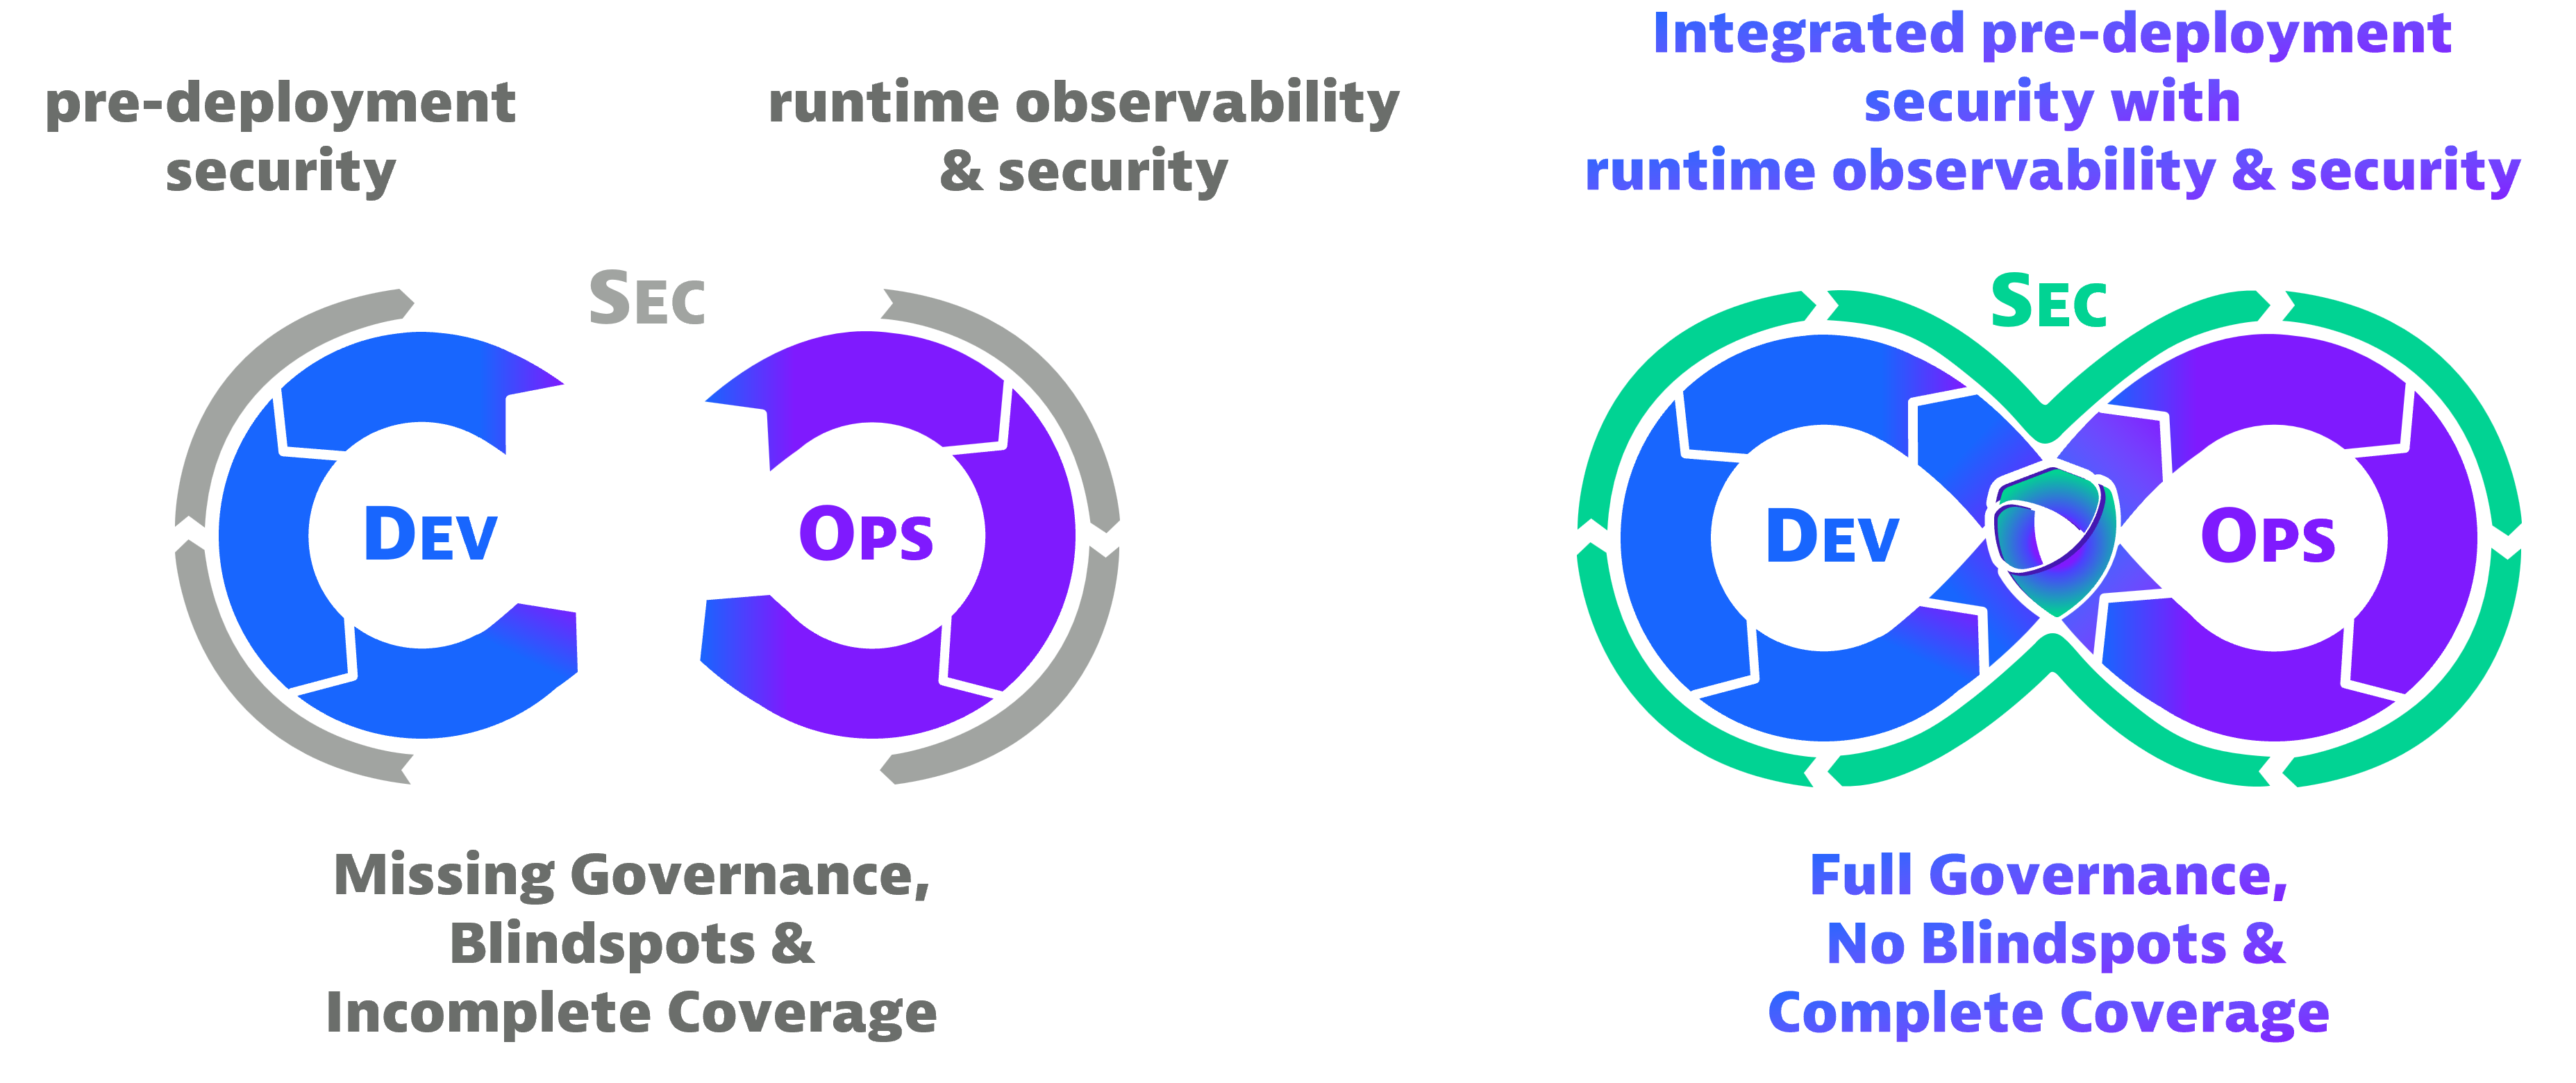 DevSecOps loop with integrated pre-deployment security with runtime observability and security with Dynatrace